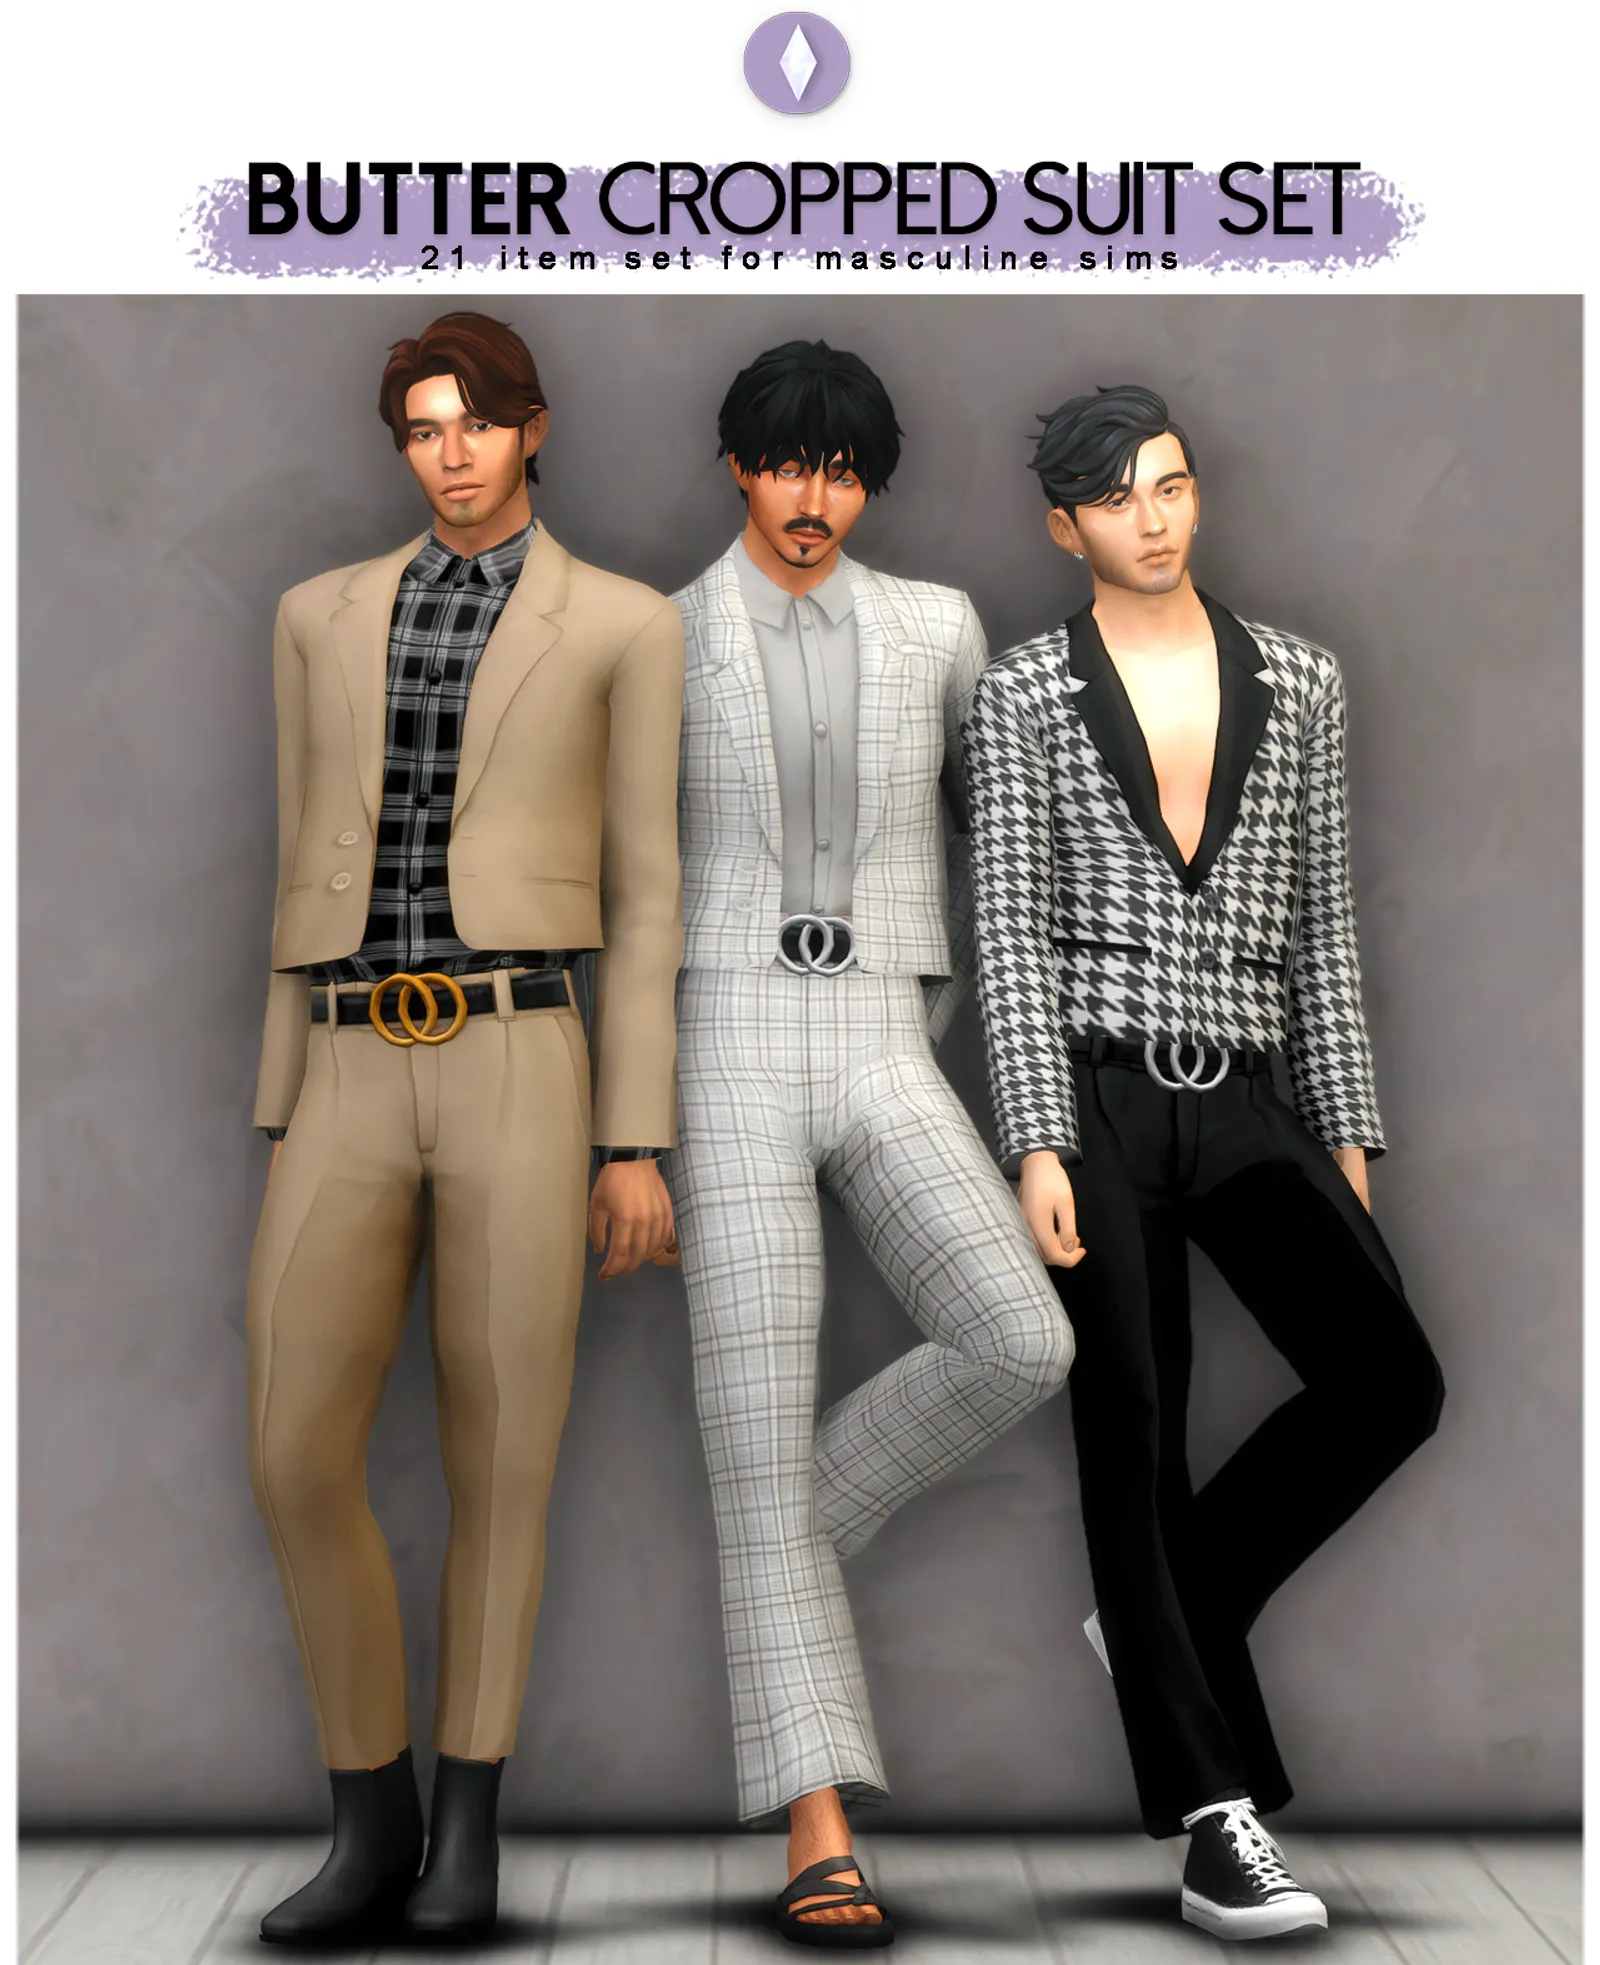 Butter Cropped Suit Set